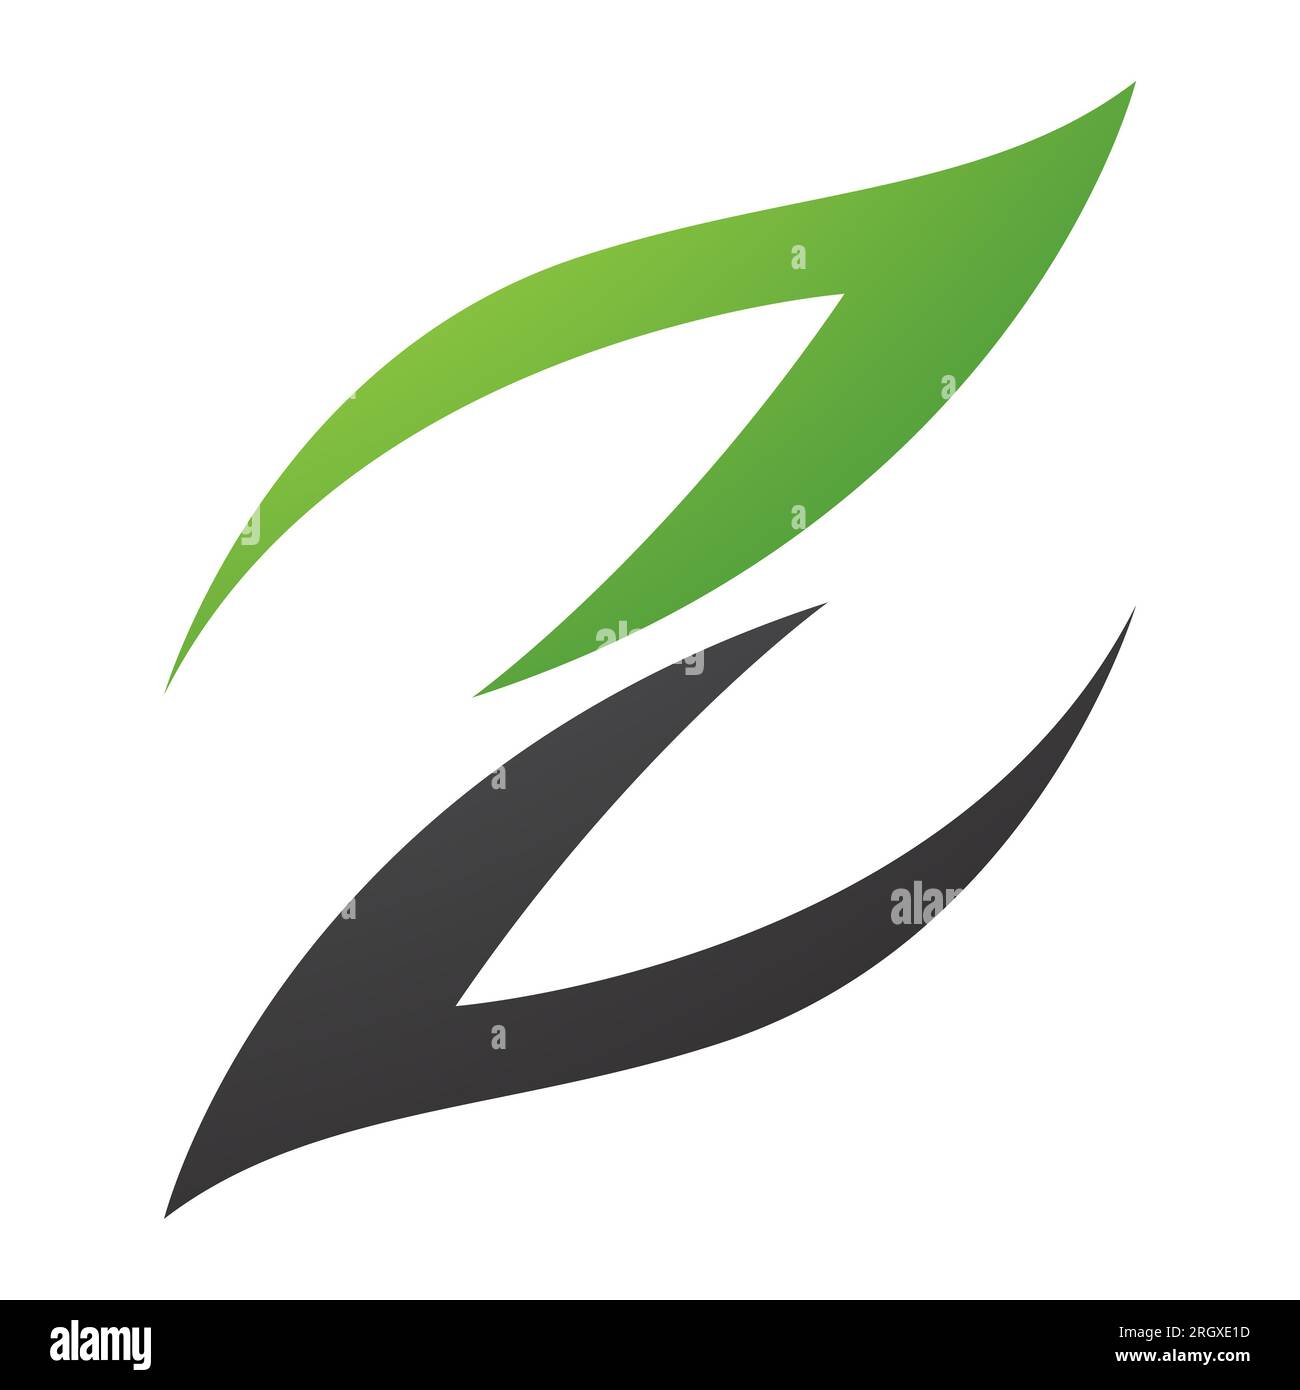 Green and Black Fire Shaped Letter Z Icon on a White Background Stock Photo